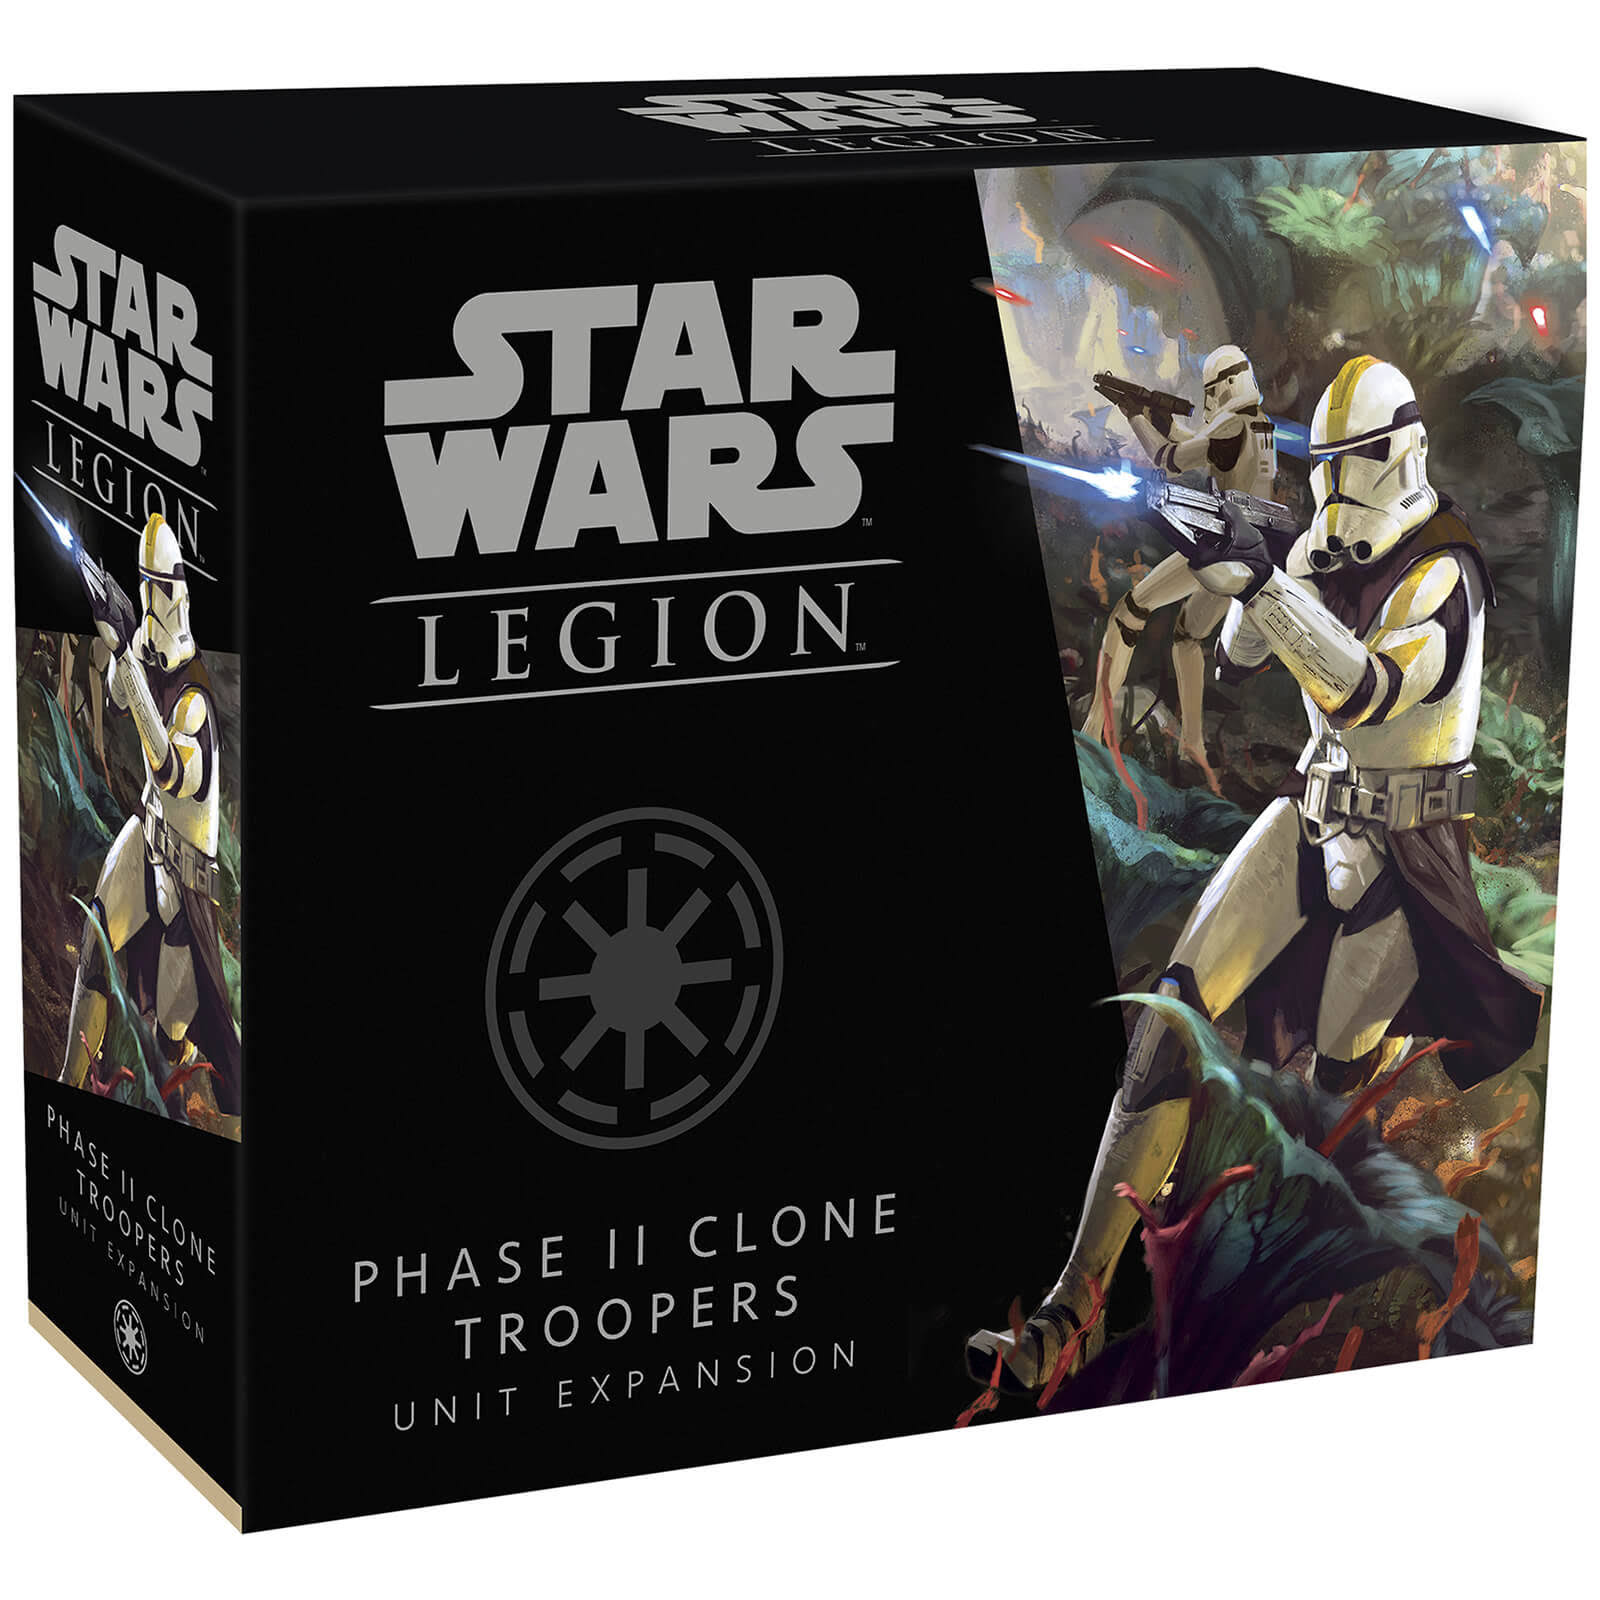 Star Wars Legion - Phase II Clone Troopers - Unit Expansion